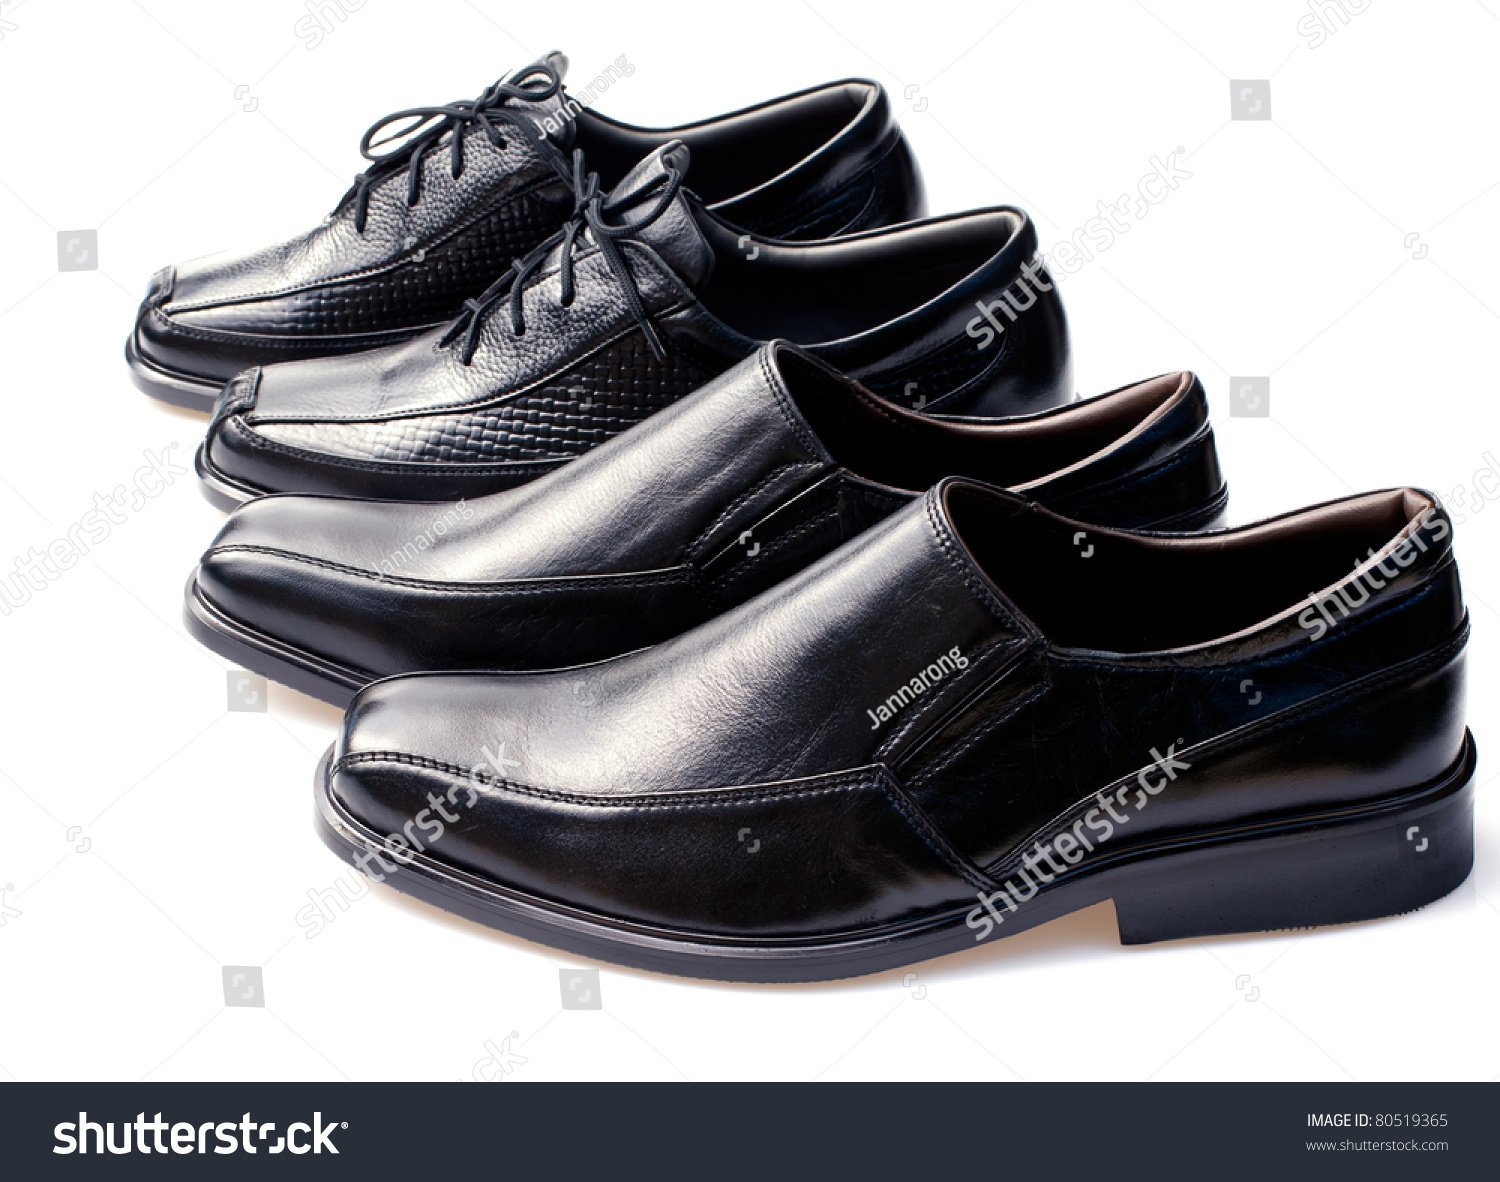 Black Genuine Leather Businessmen'S Shoes On White Stock Photo 80519365 ...